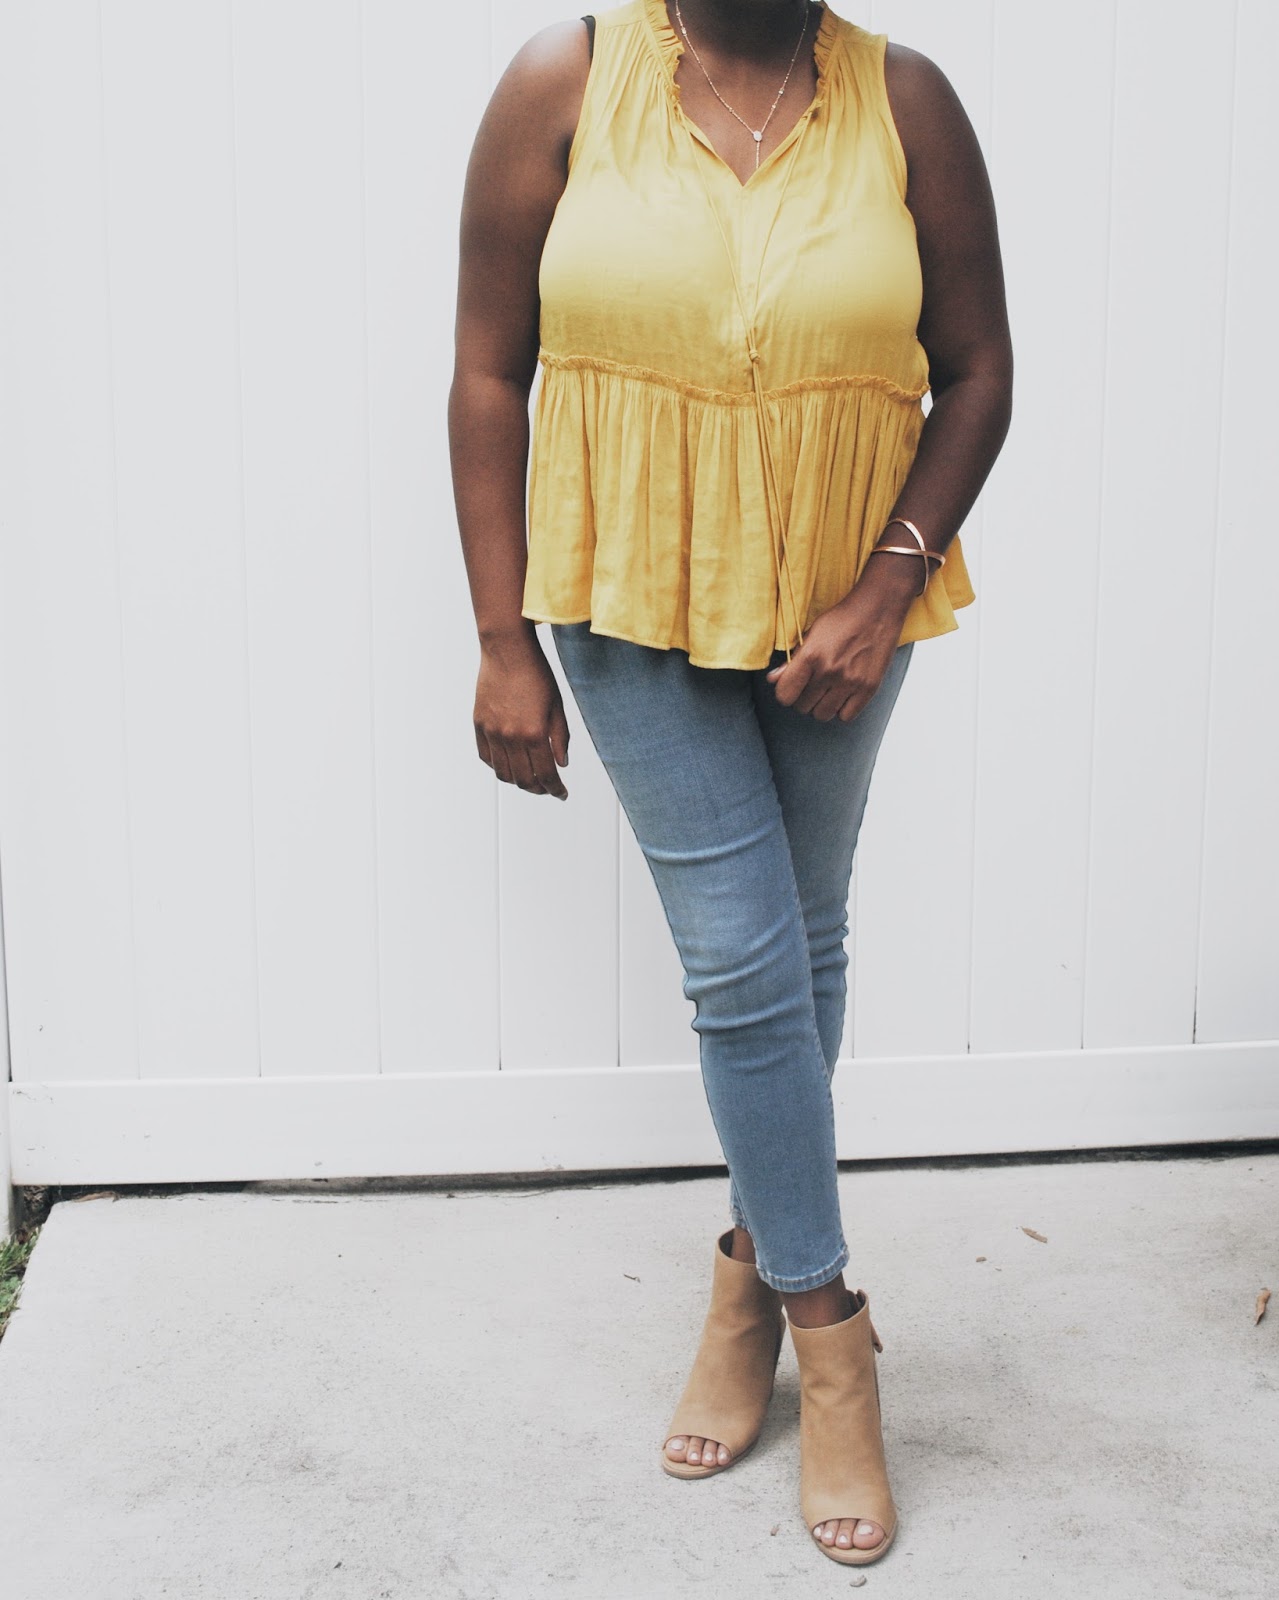 TRULY YOURS, A.: Loft Peplum Top